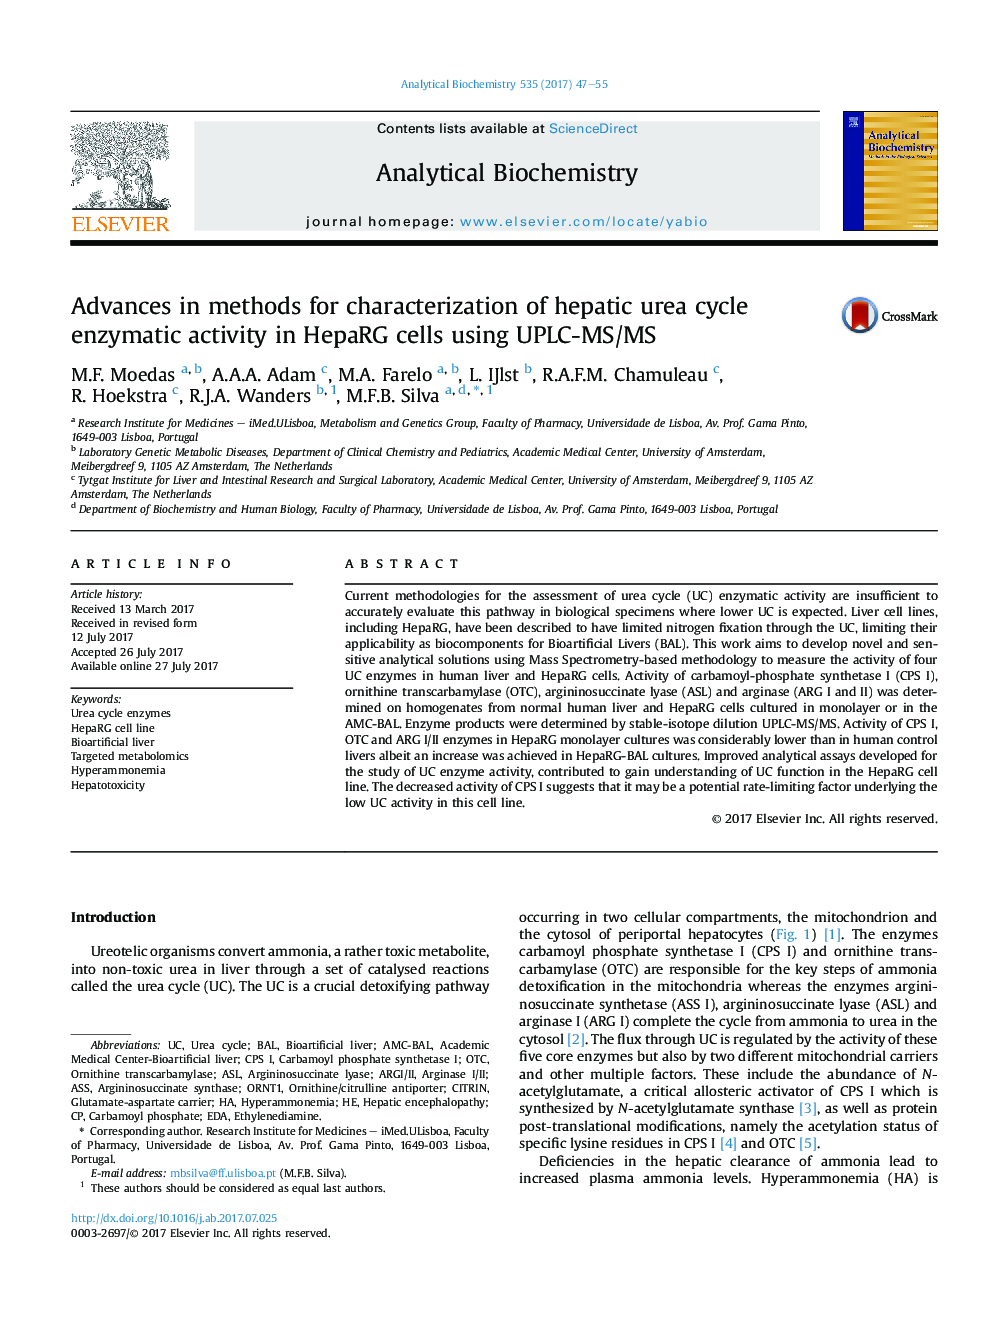 Advances in methods for characterization of hepatic urea cycle enzymatic activity in HepaRG cells using UPLC-MS/MS